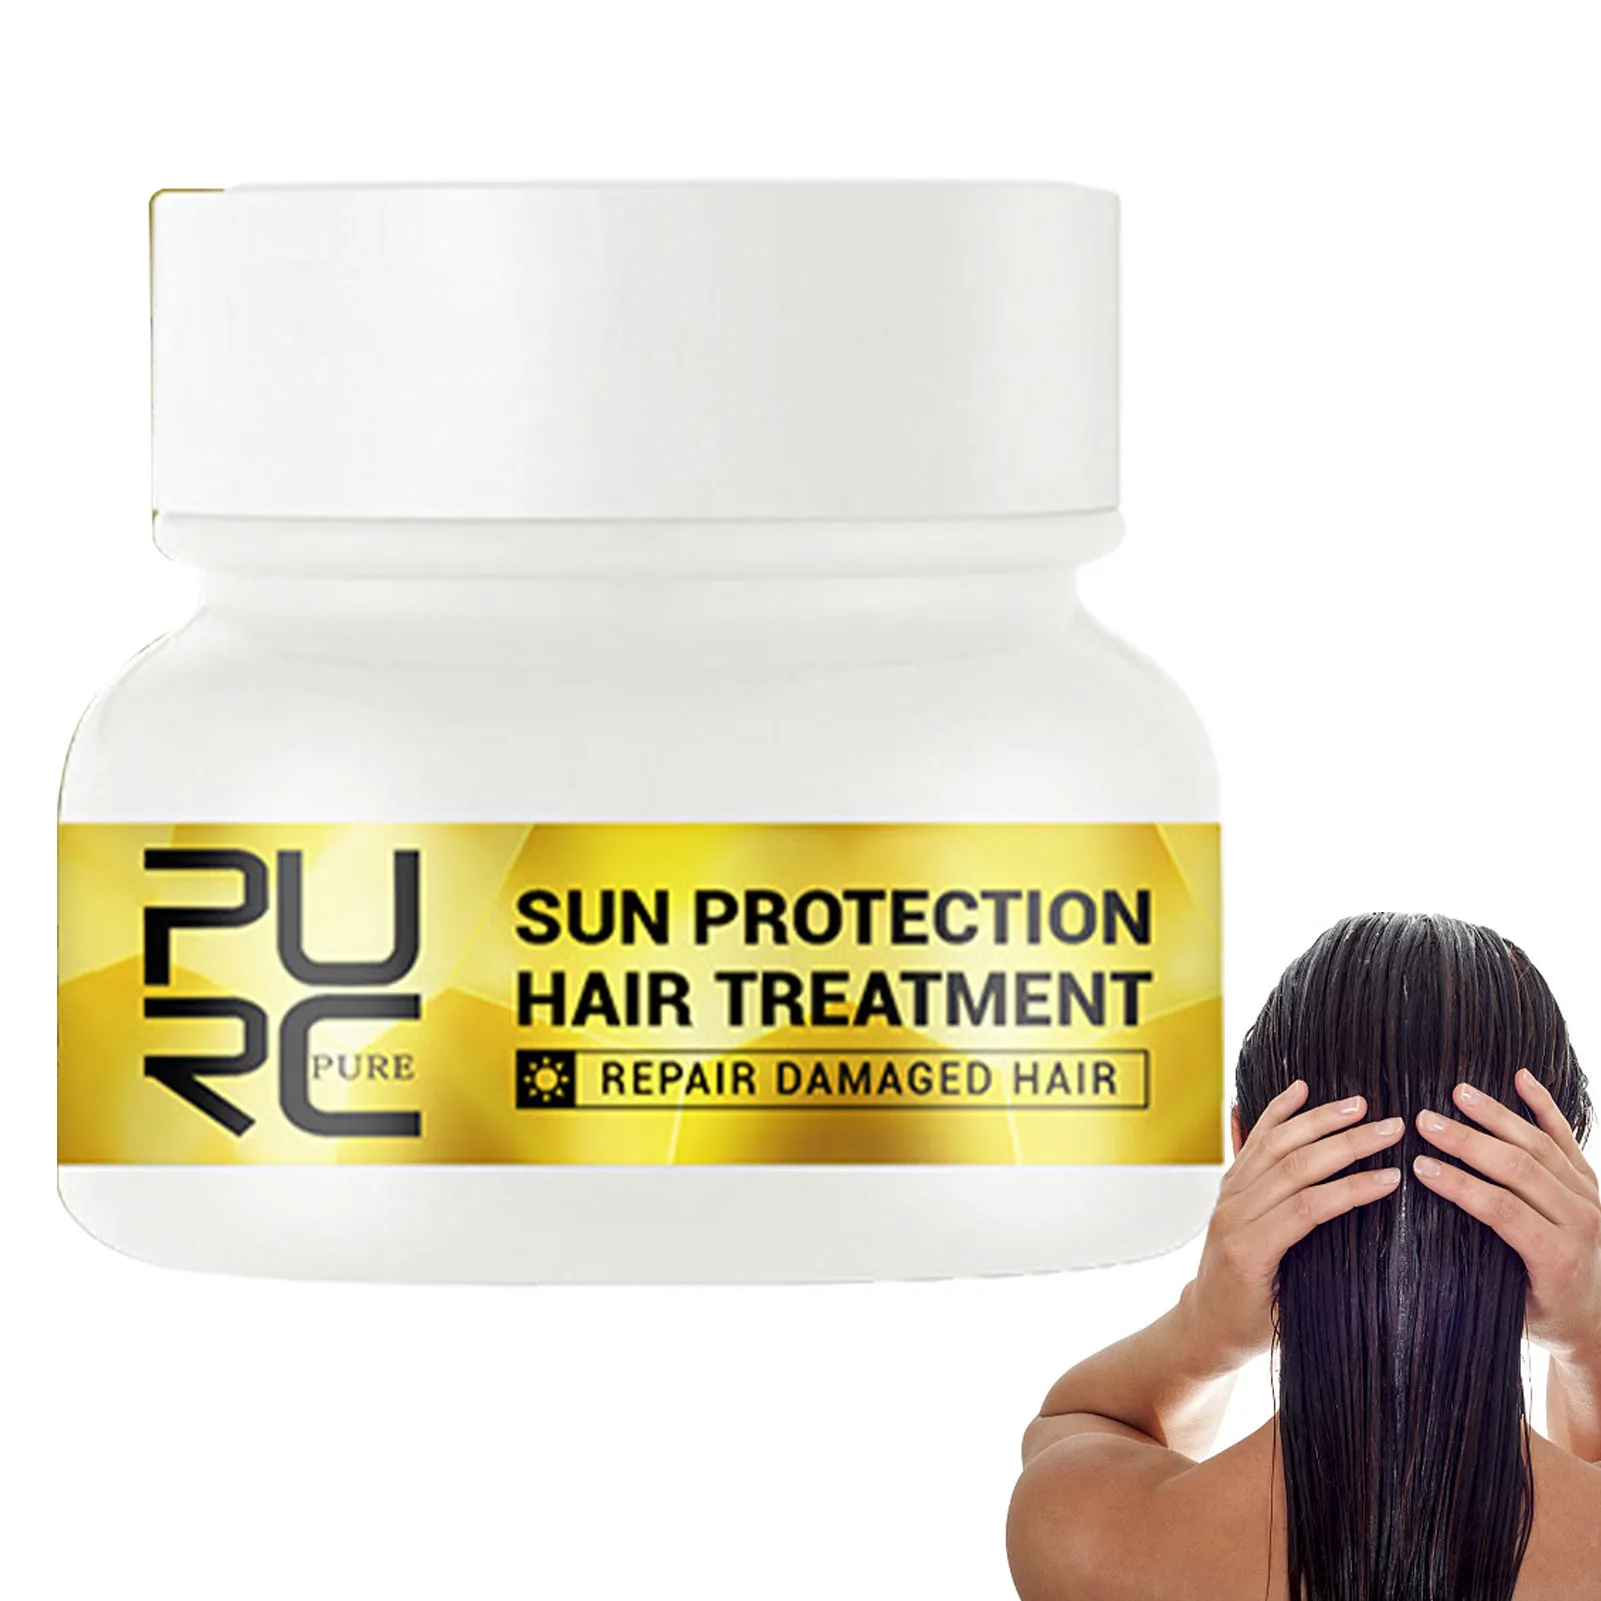 

Hair Masque Deep Conditioner For Sun Protection Repairs Damaged Hair Masque And Deep Conditioner For Dry Or Damaged Hair